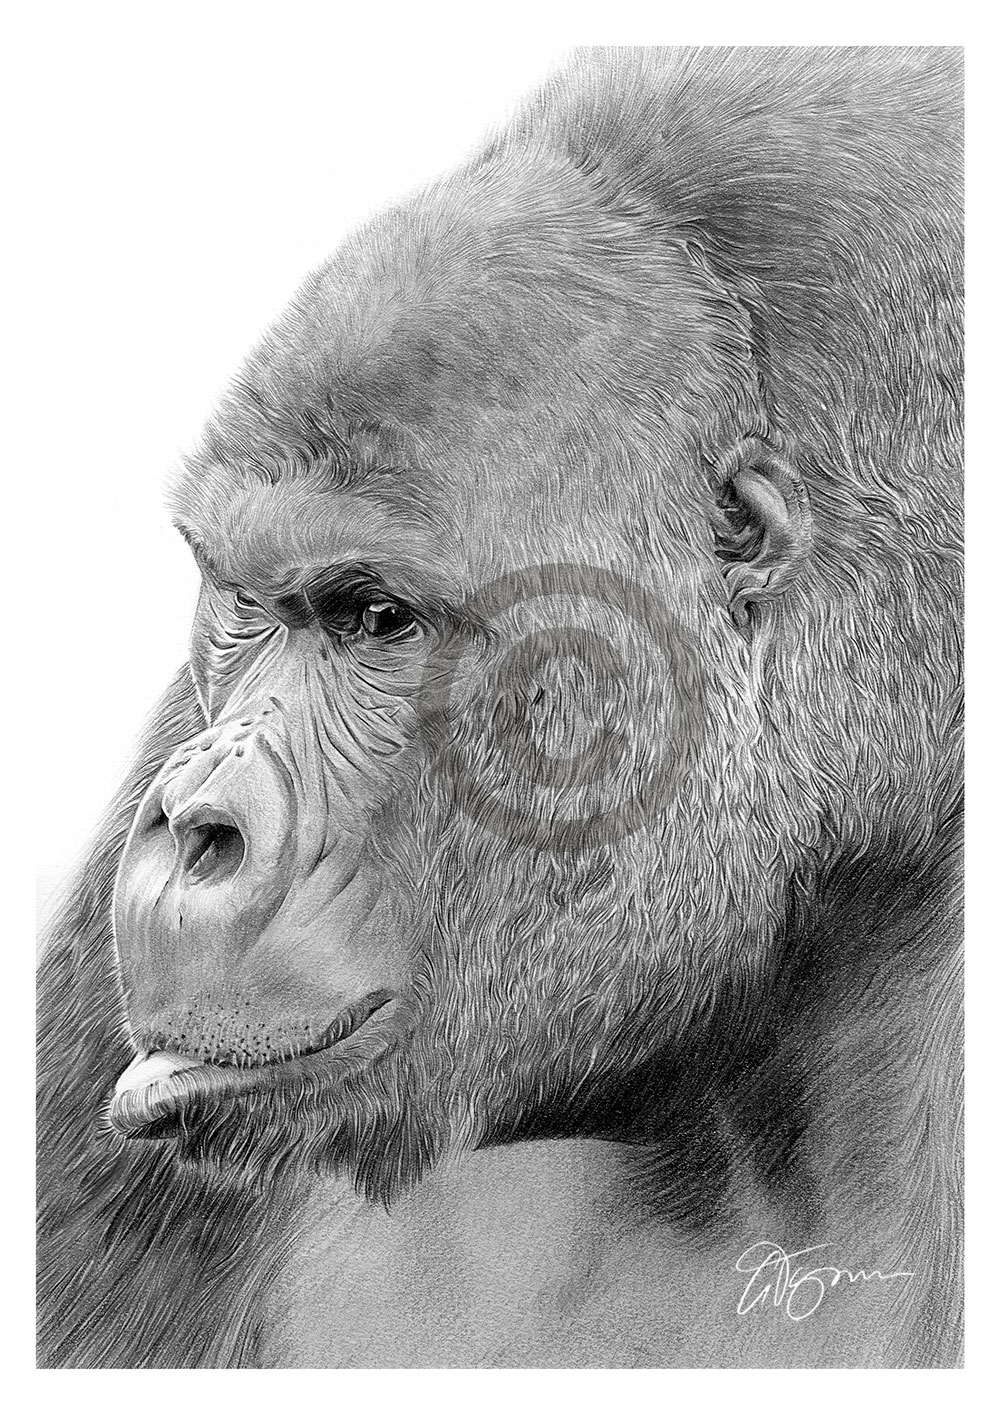 Pencil drawing of an African mountain gorilla by artist Gary Tymon